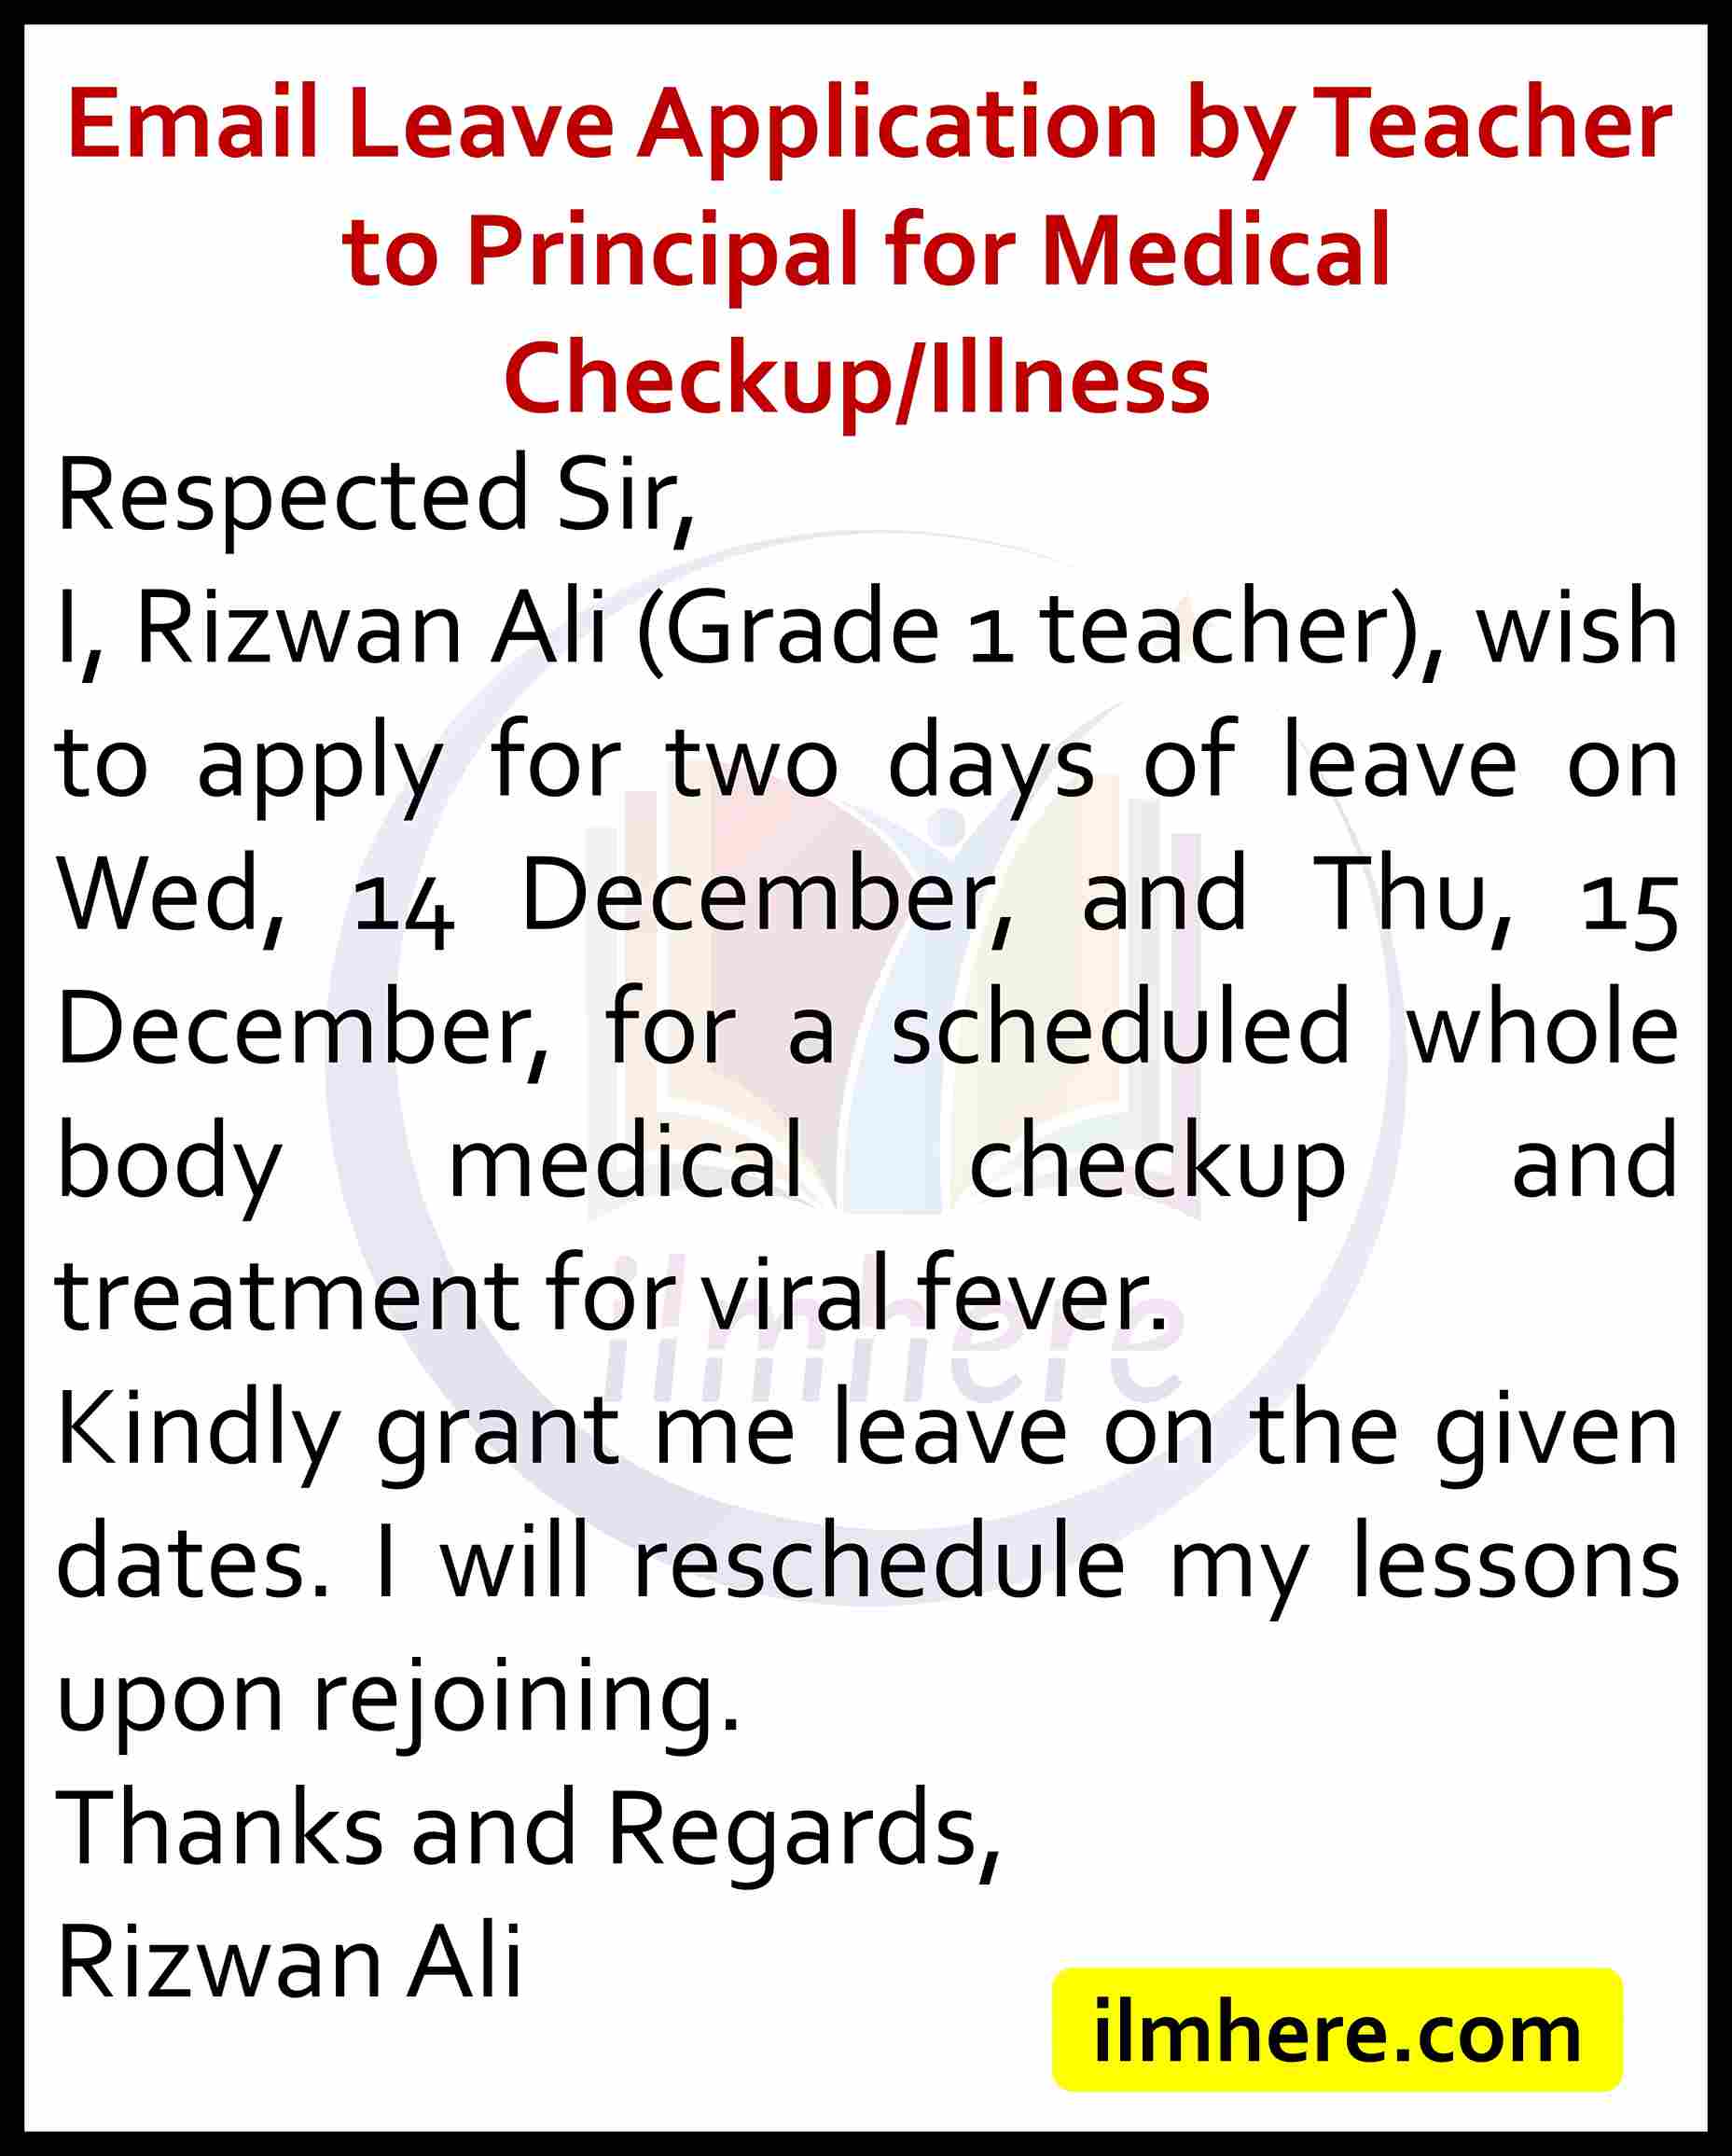 Email Leave Application by Teacher to Principal for Medical Checkup/Illness 